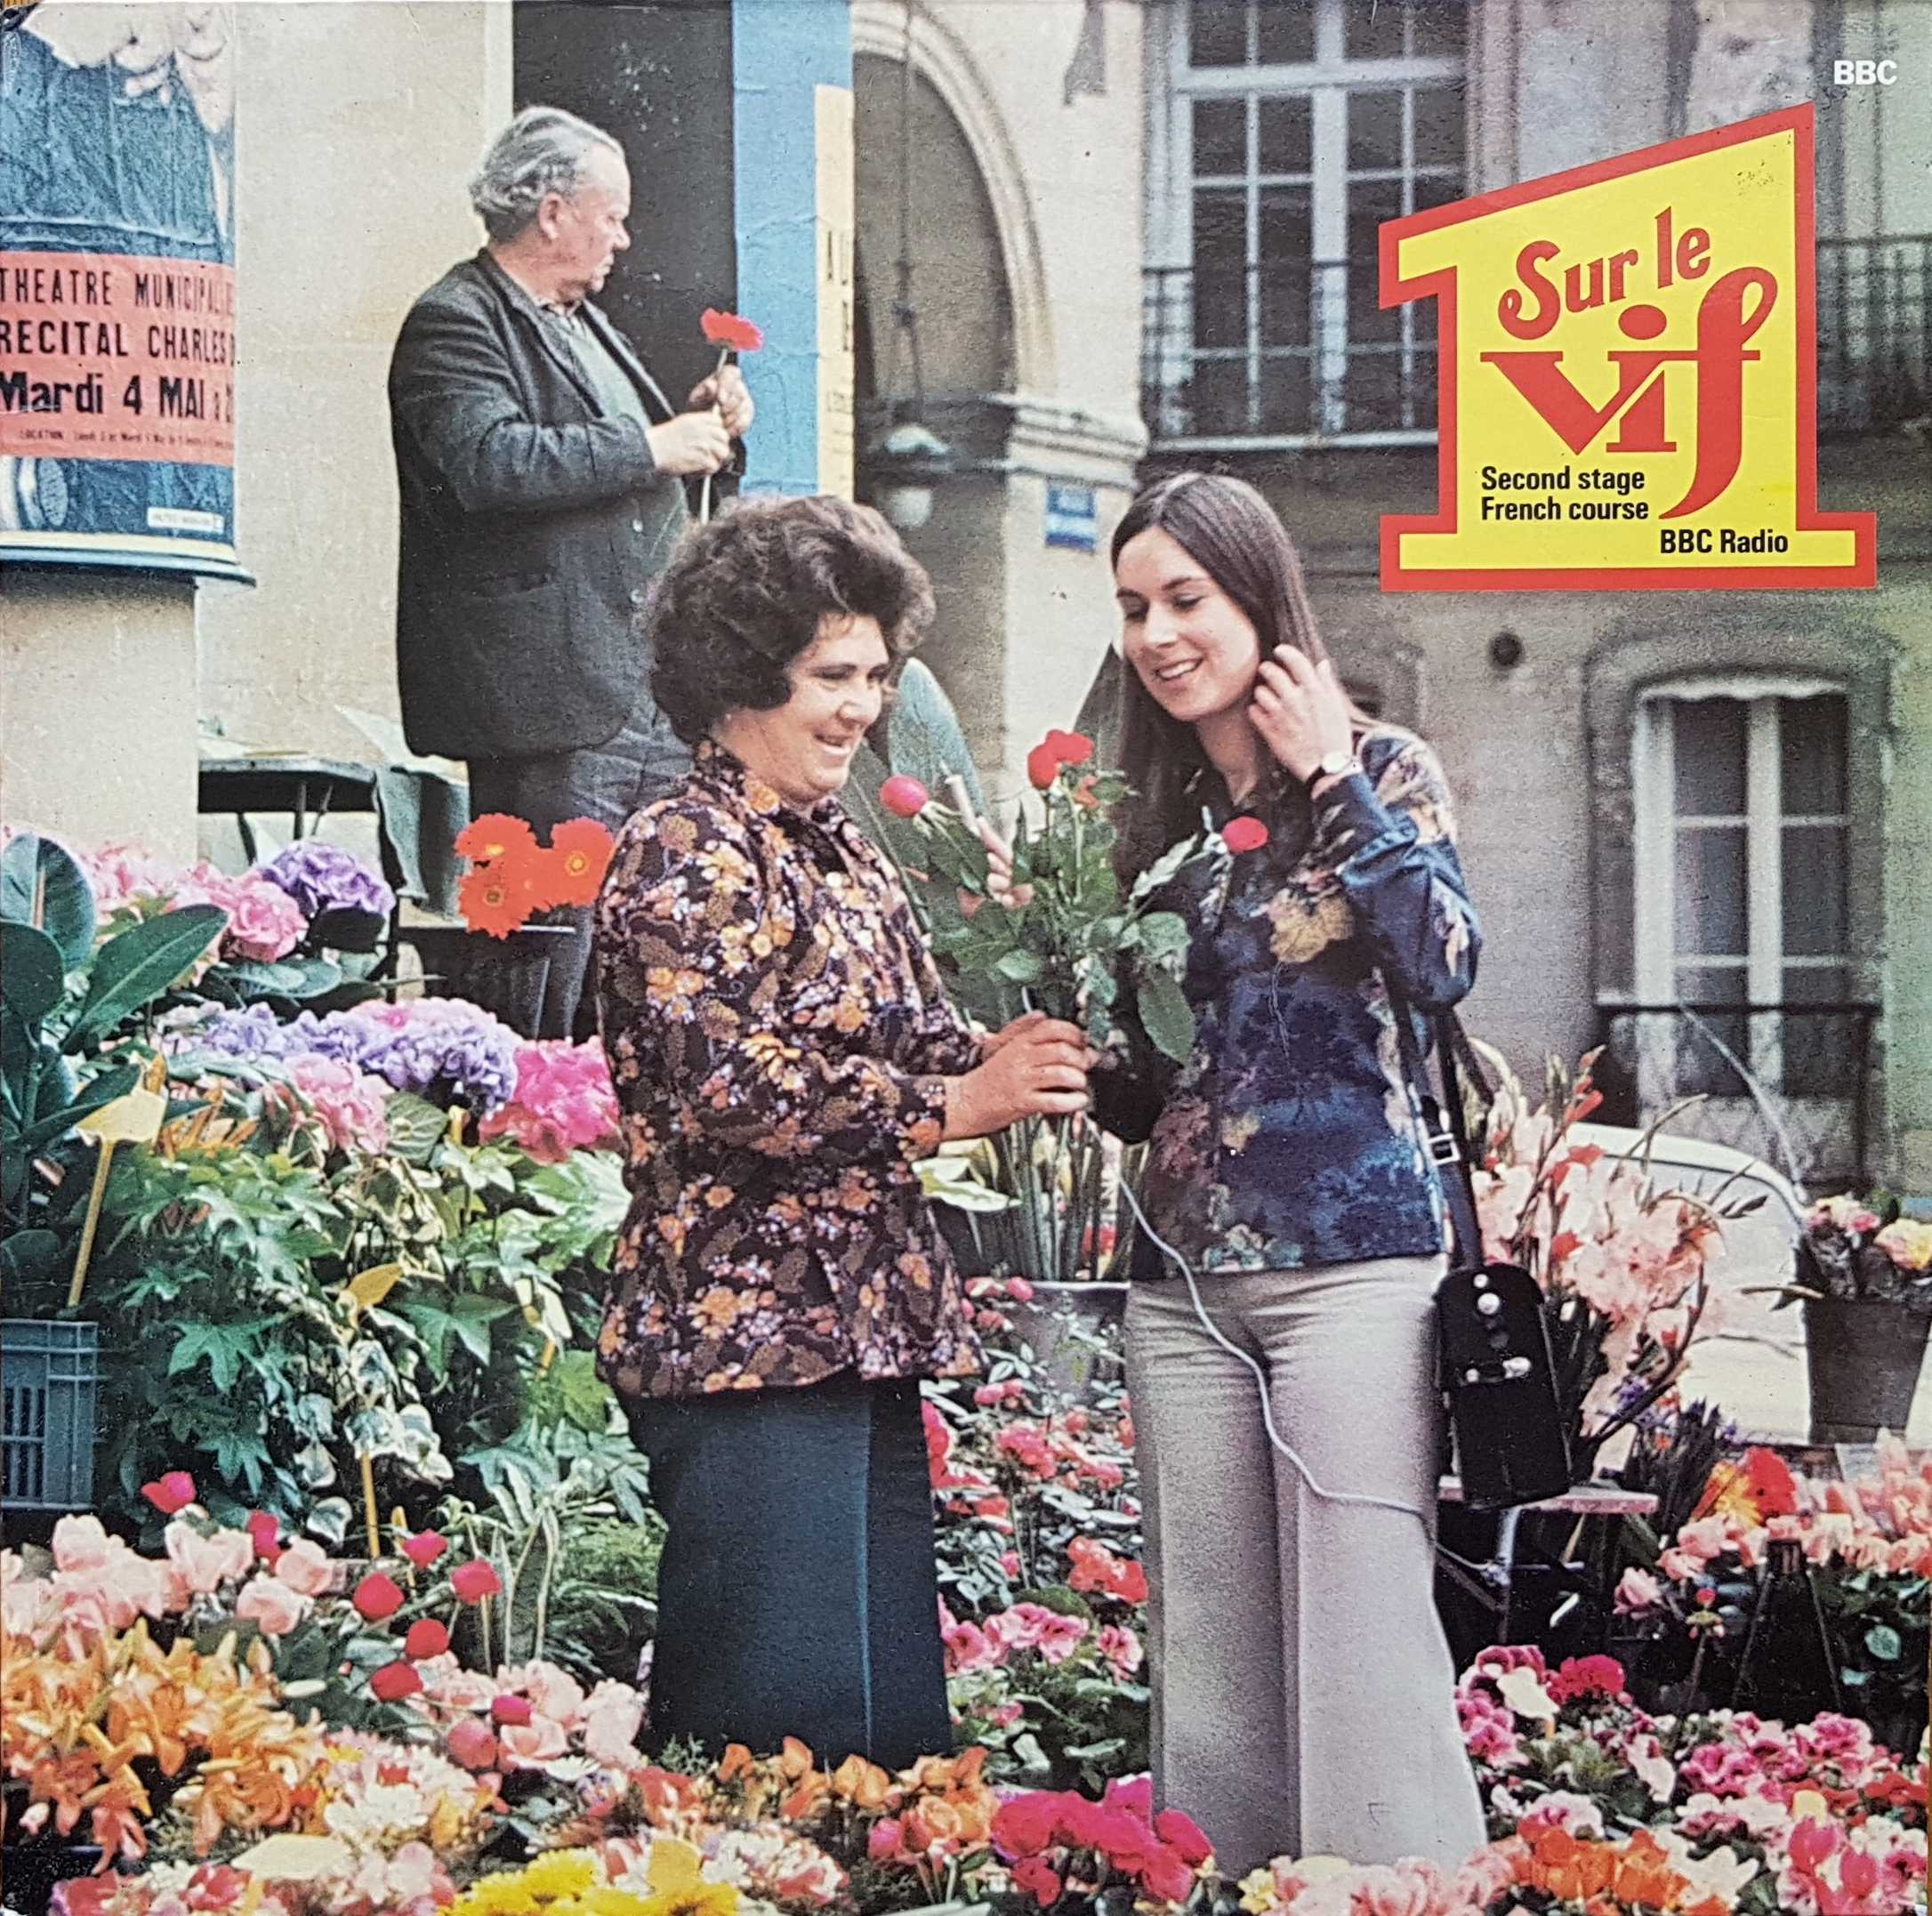 Picture of OP 222 Sur le vif 1 - Second stage French course - Programmes 1 - 10 by artist Various from the BBC albums - Records and Tapes library